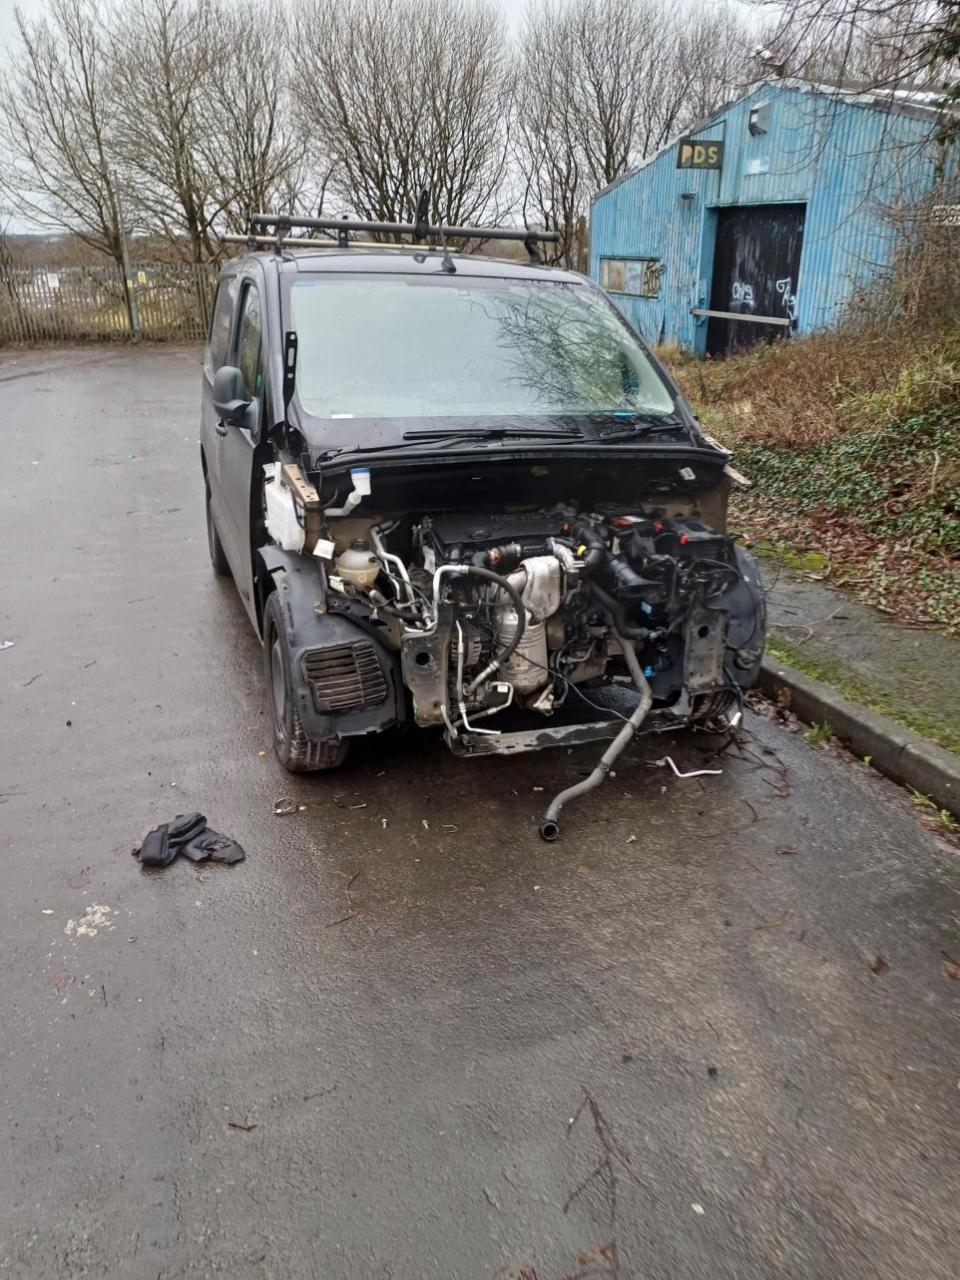 The Bolton News: The vehicle was targeted on Whitworth Street